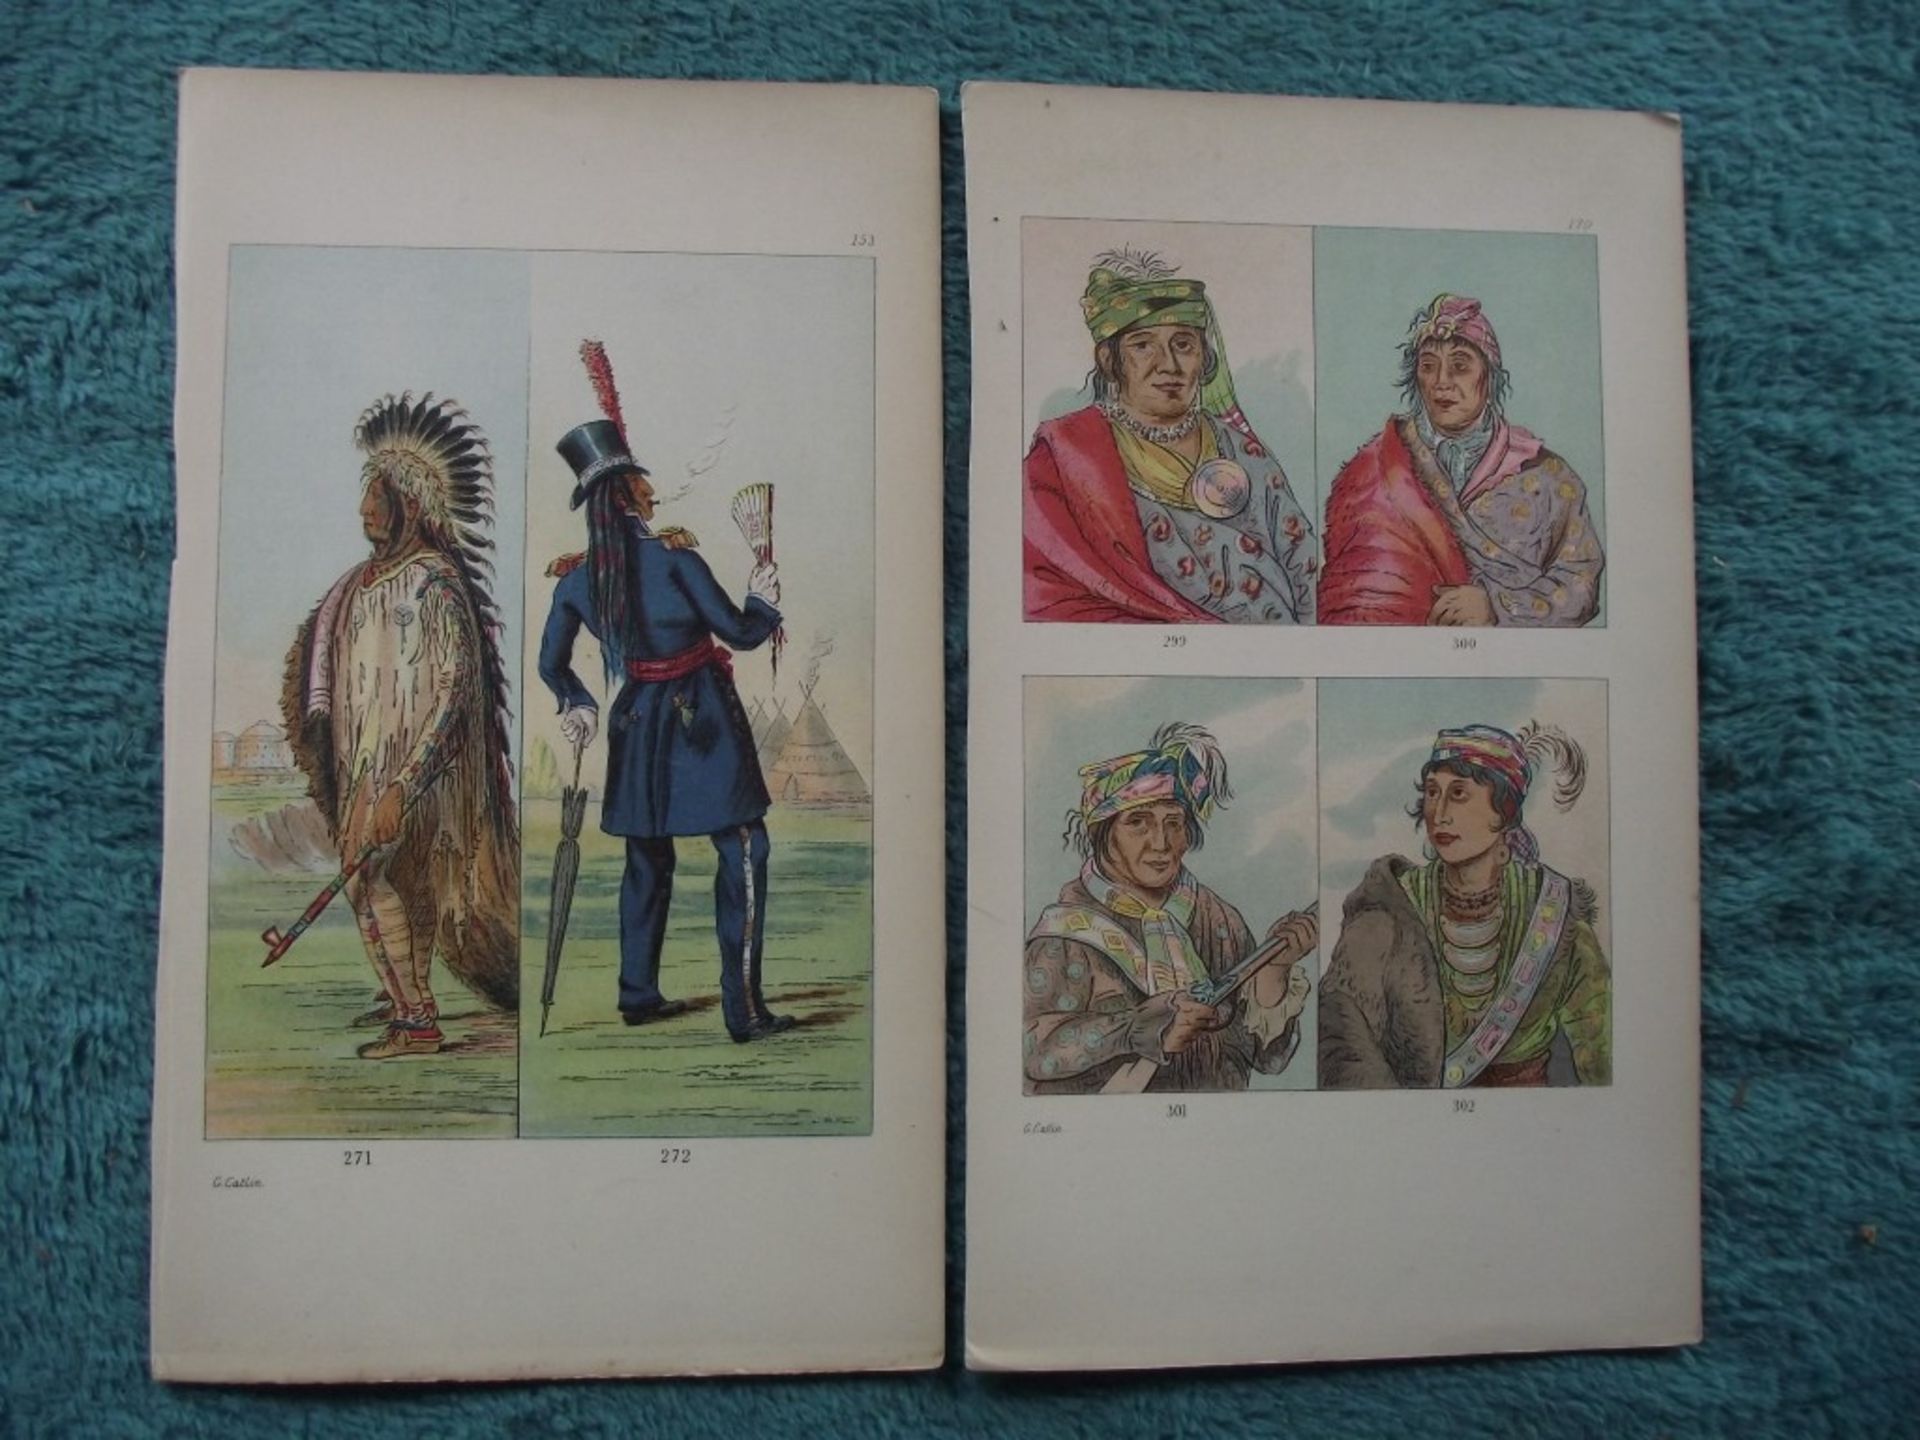 65 X book plates - George Catlin - Illustrations of the North American Indians - Circa 1876 - Image 5 of 40